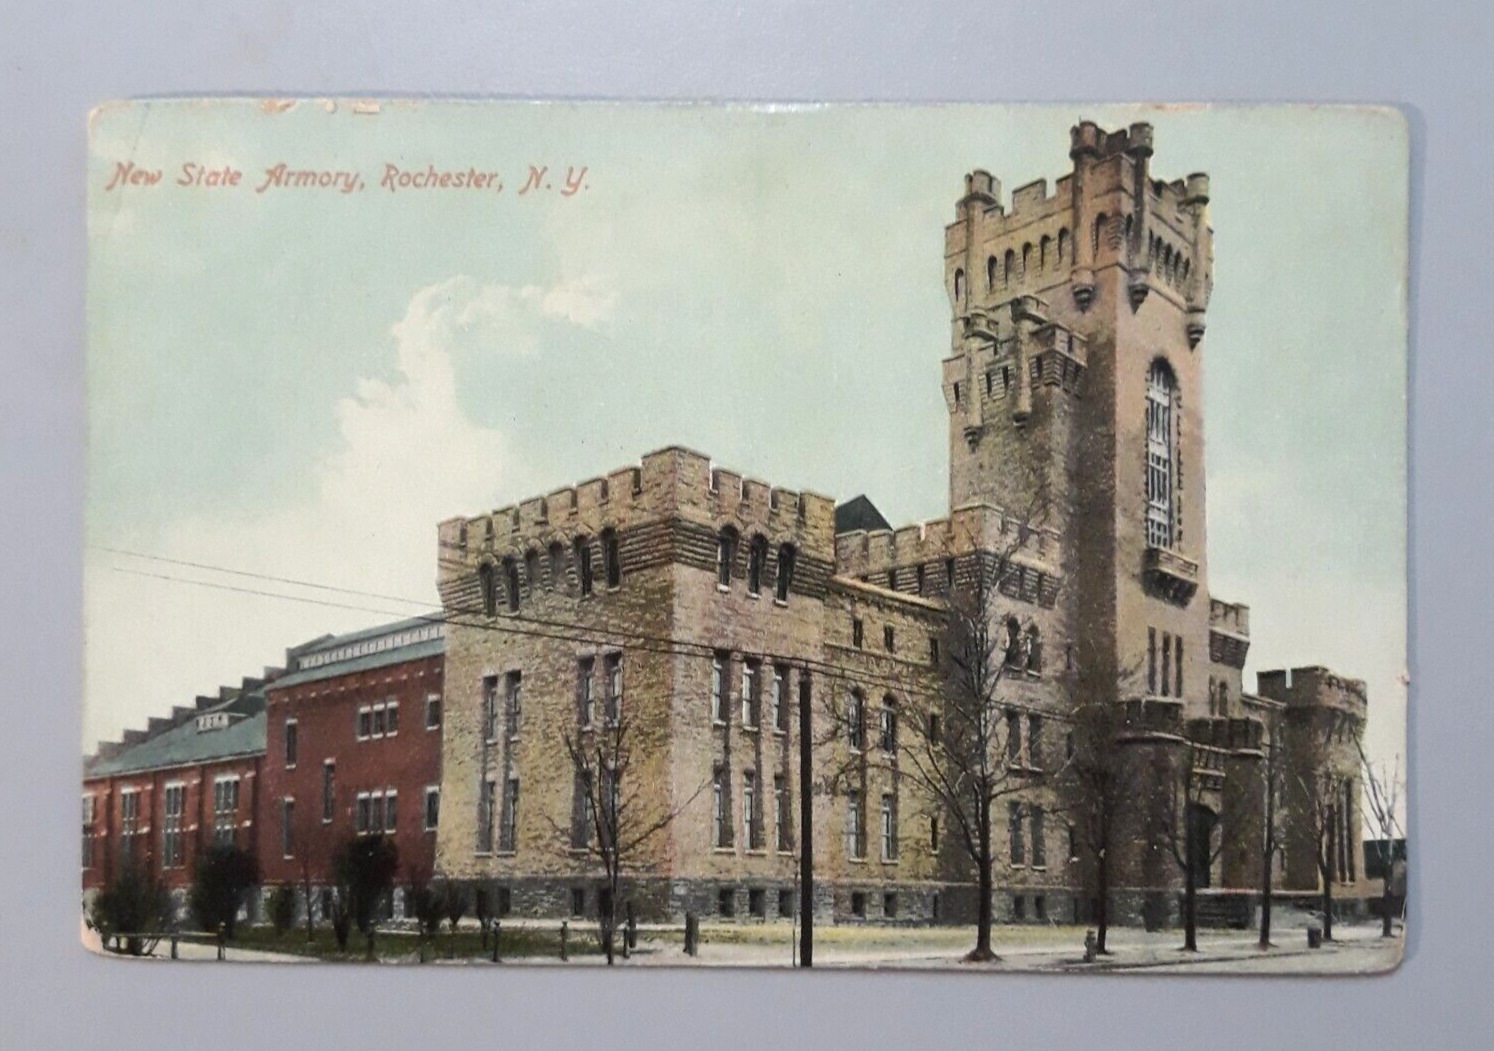 Vintage 1910 Postcard Rochester NY - NEW STATE ARMORY